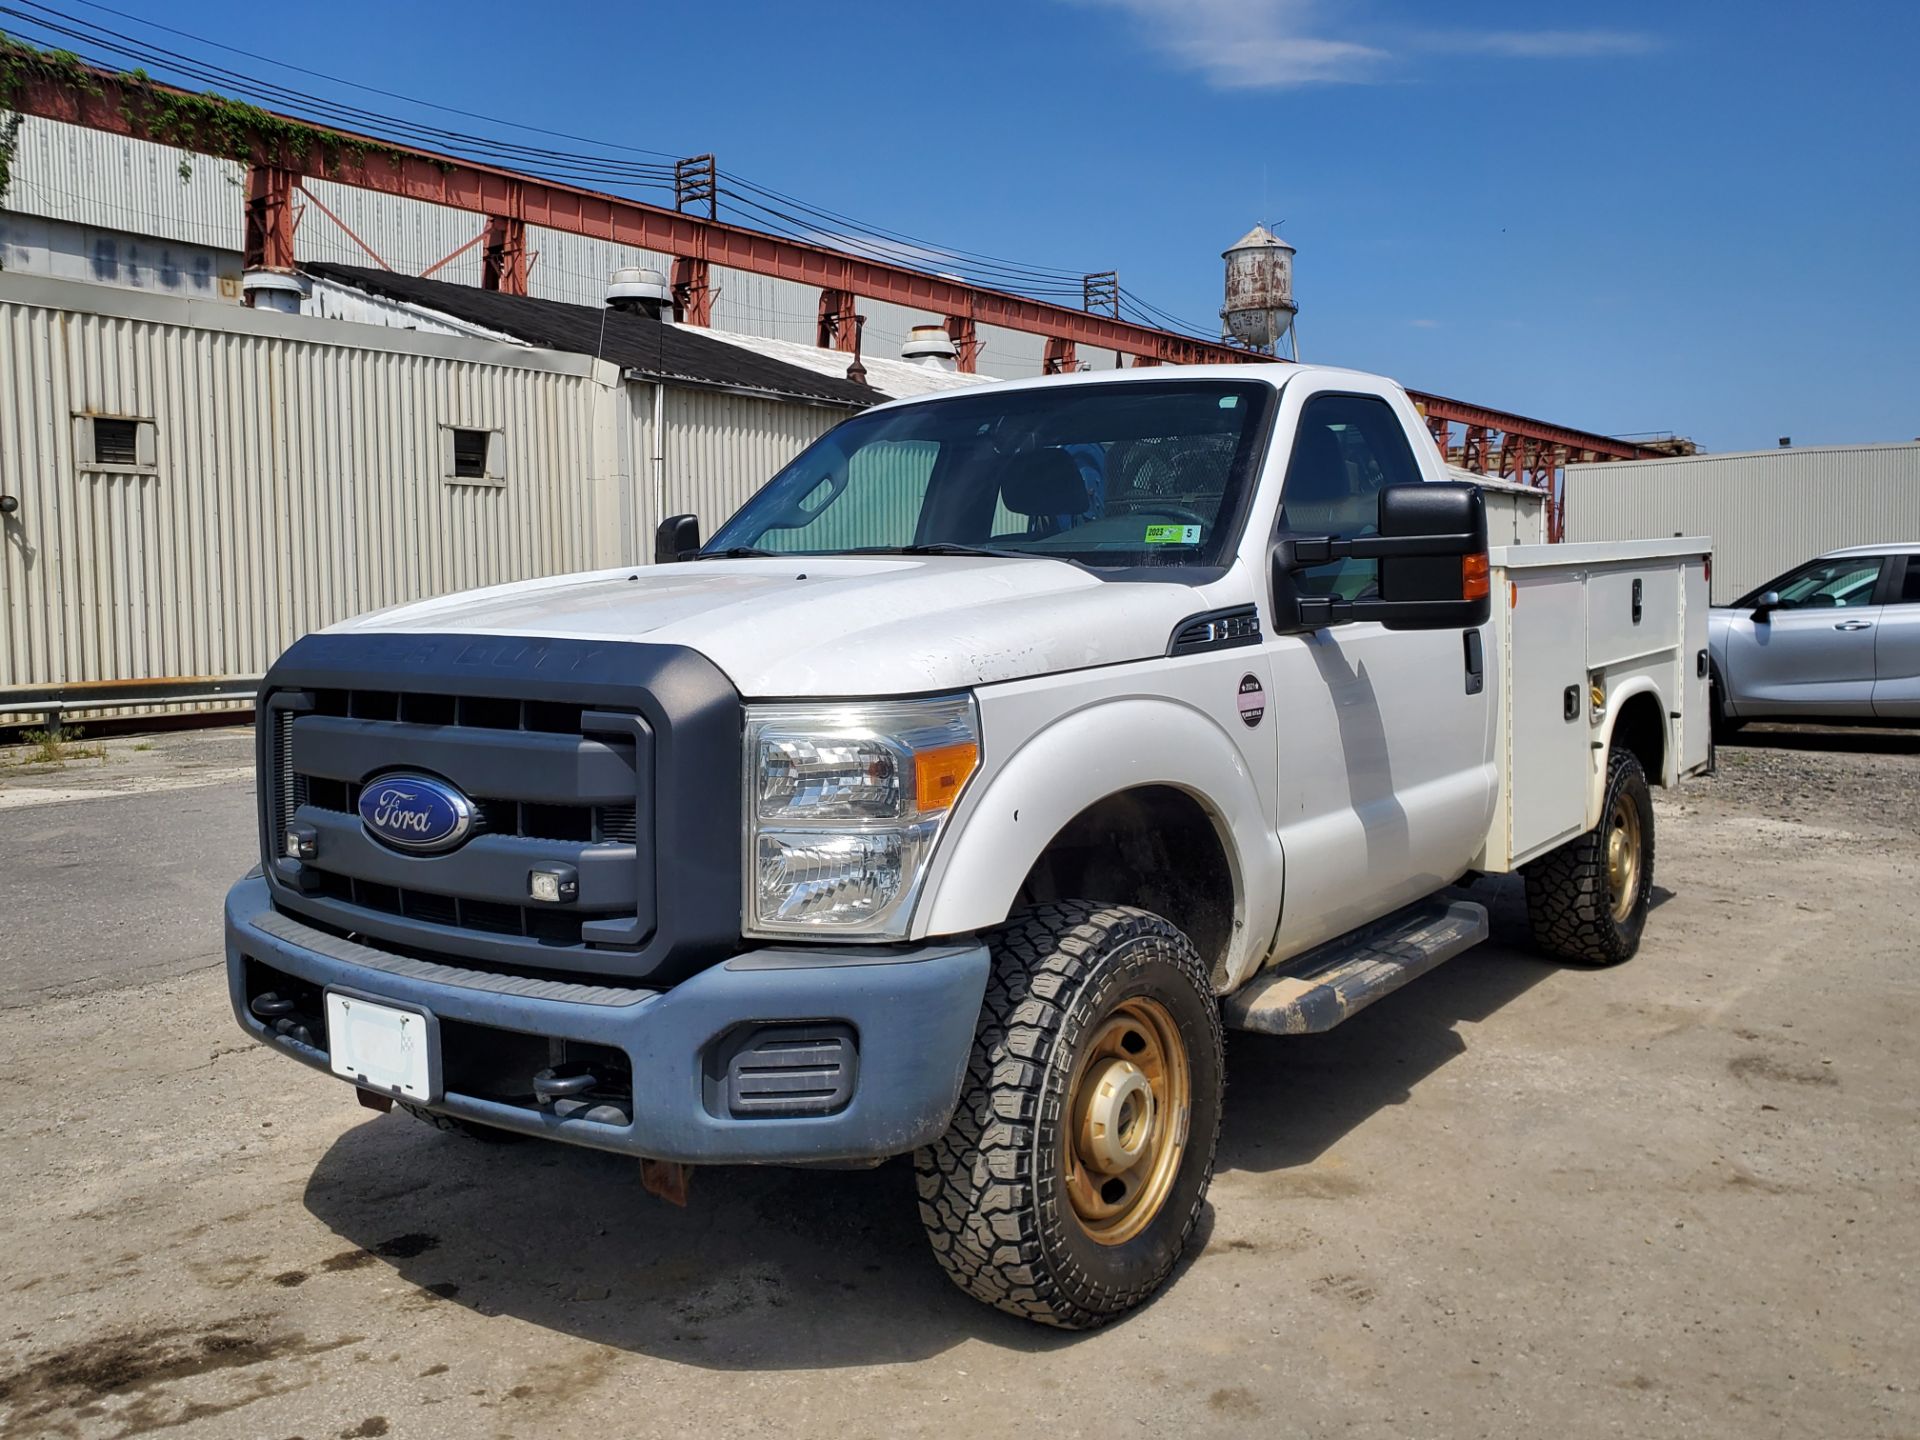 2016 Ford F350 Service Truck - Image 6 of 21